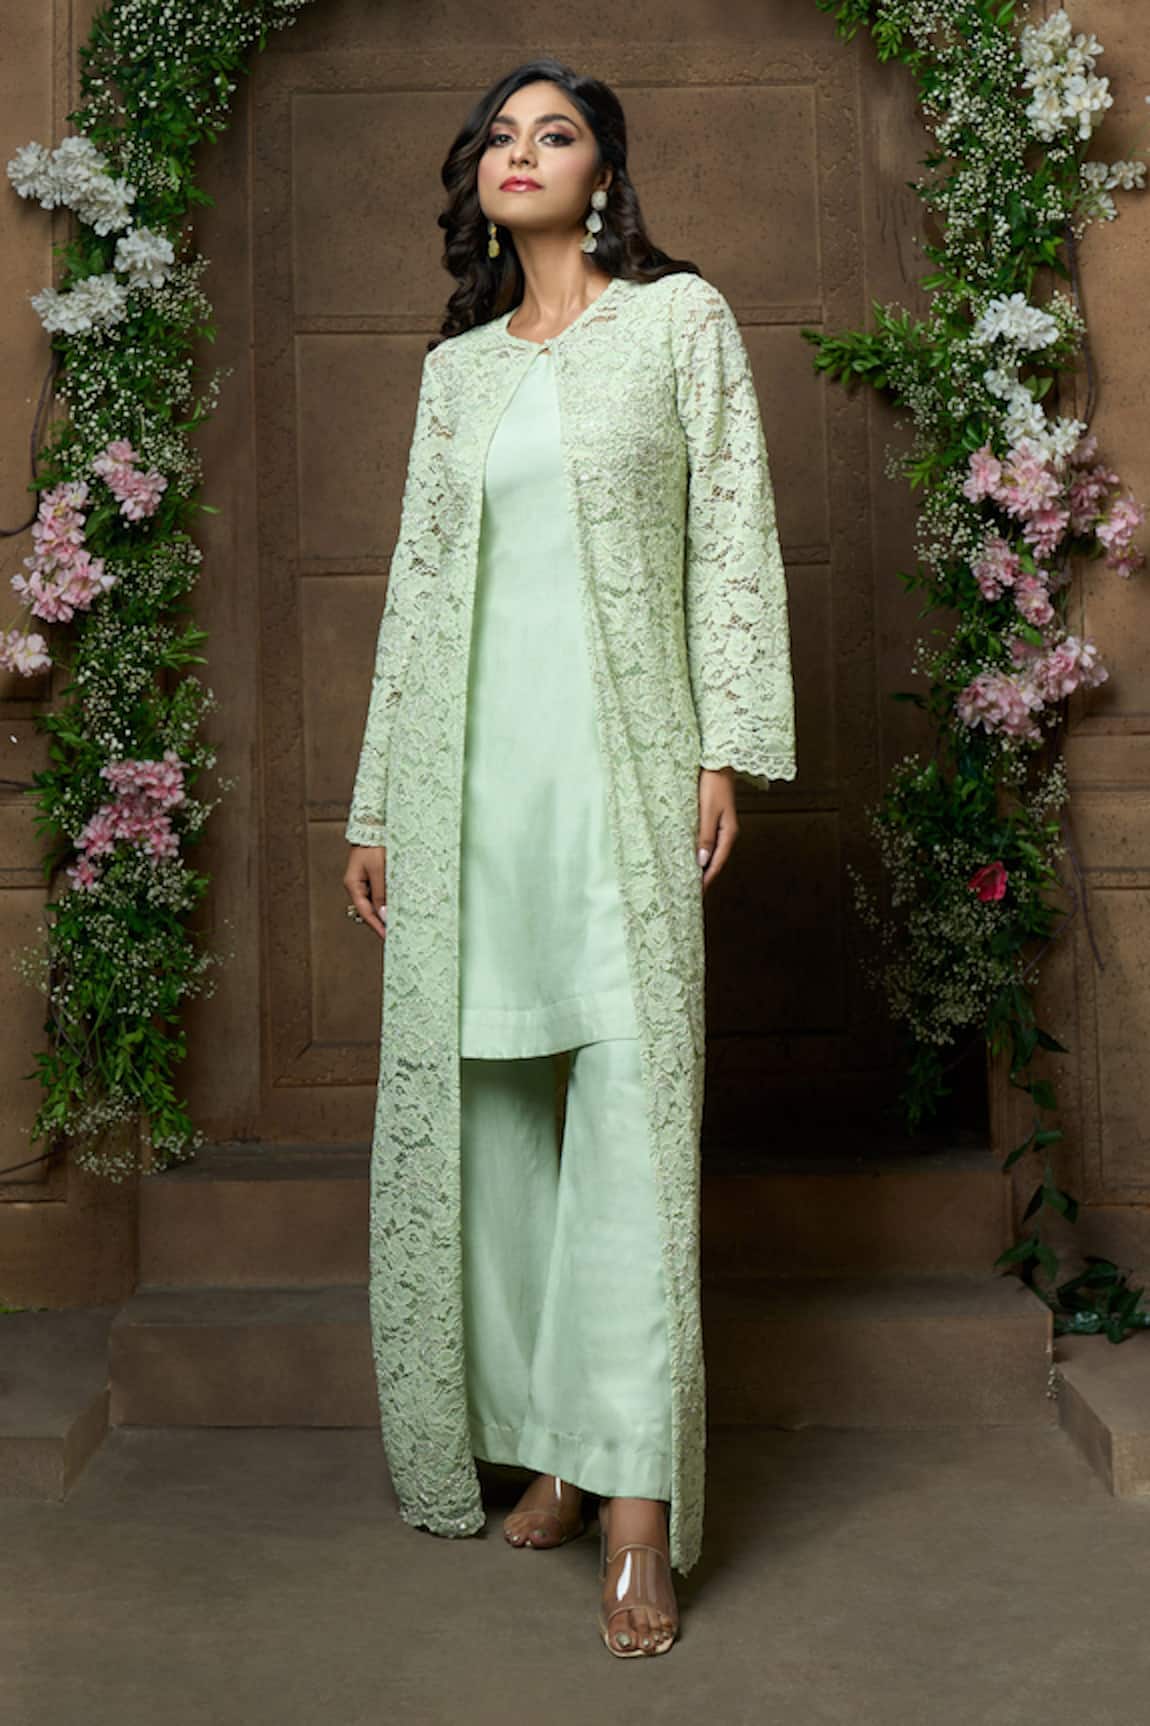 Ariyana Couture Floral Lace Work Jacket Flared Pant Set